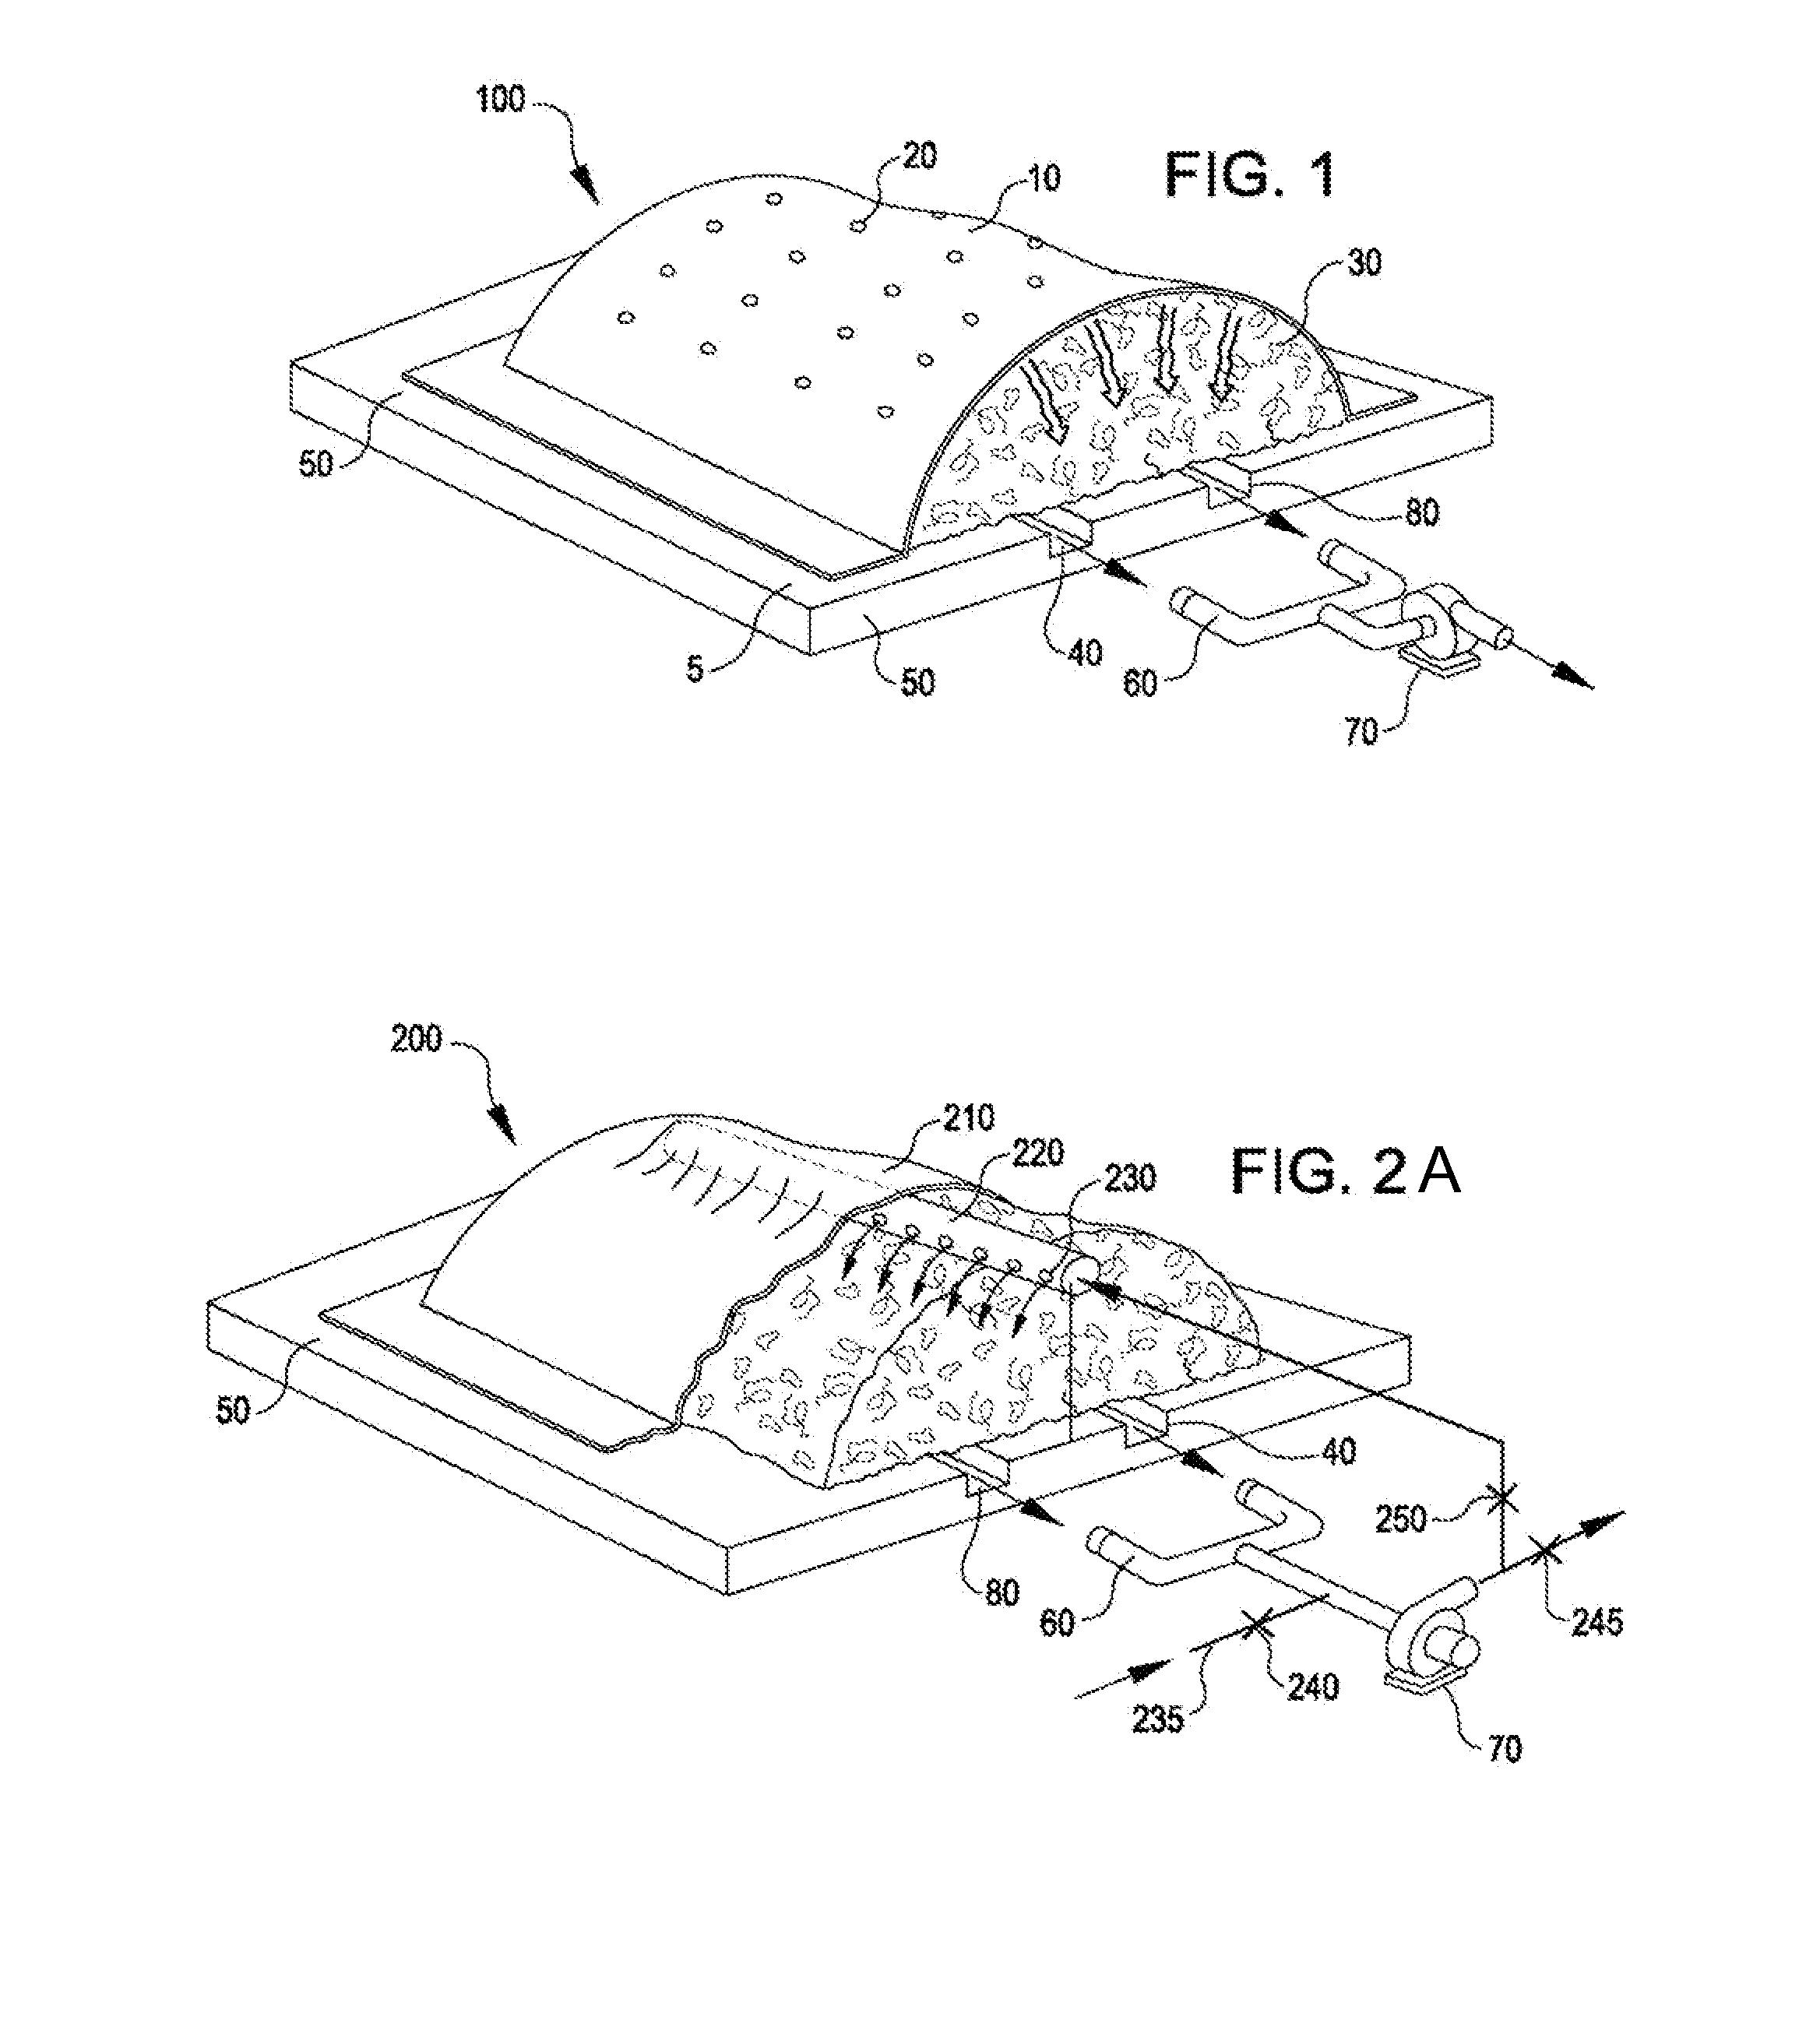 Systems and Methods for Generating Compost